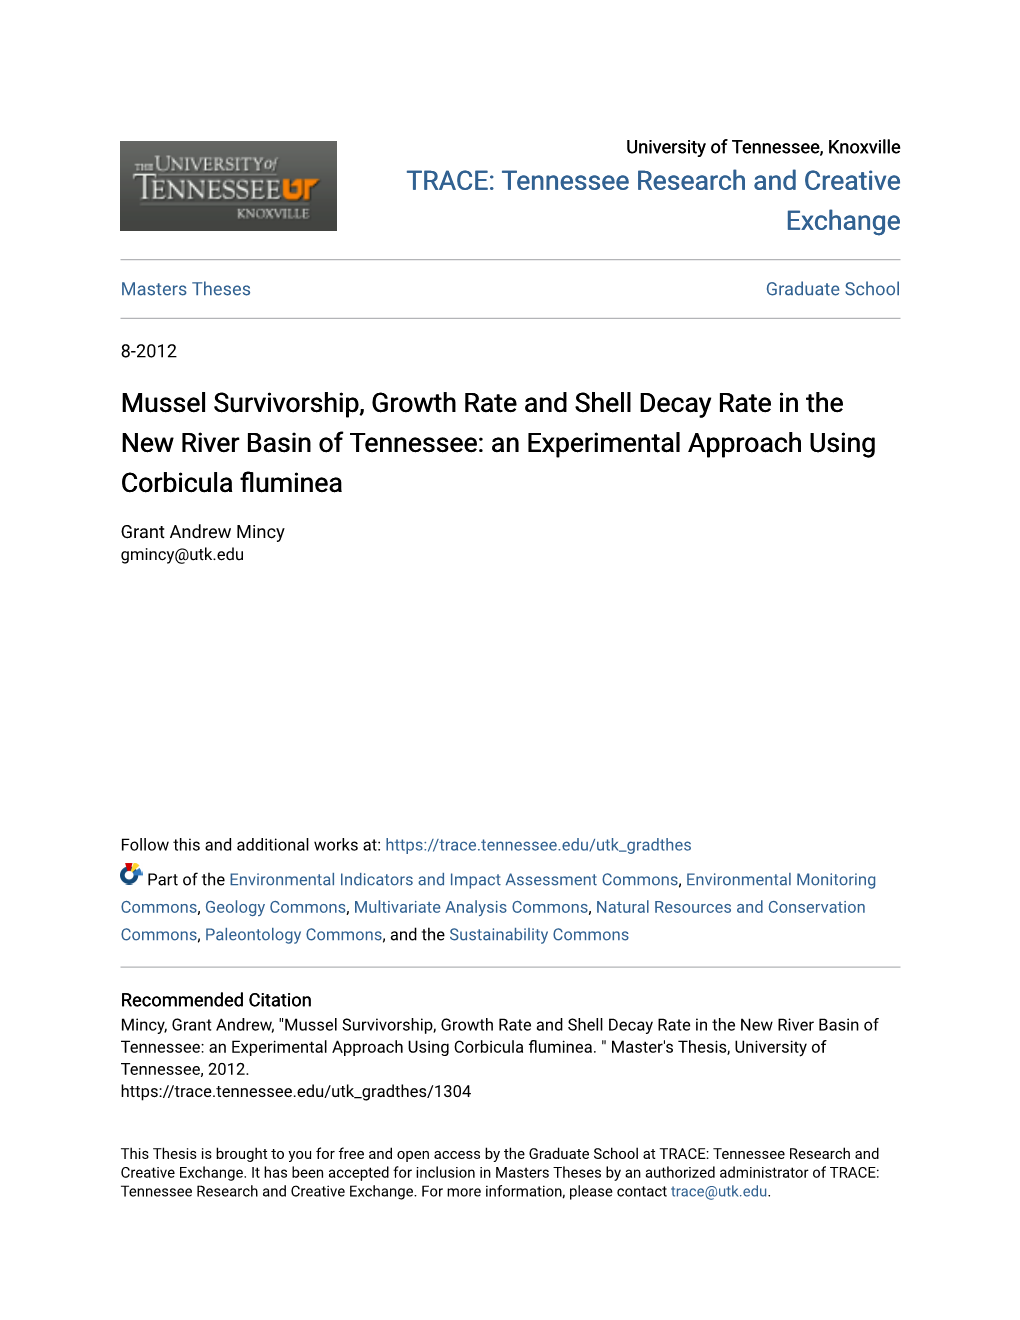 Mussel Survivorship, Growth Rate and Shell Decay Rate in the New River Basin of Tennessee: an Experimental Approach Using Corbicula Fluminea